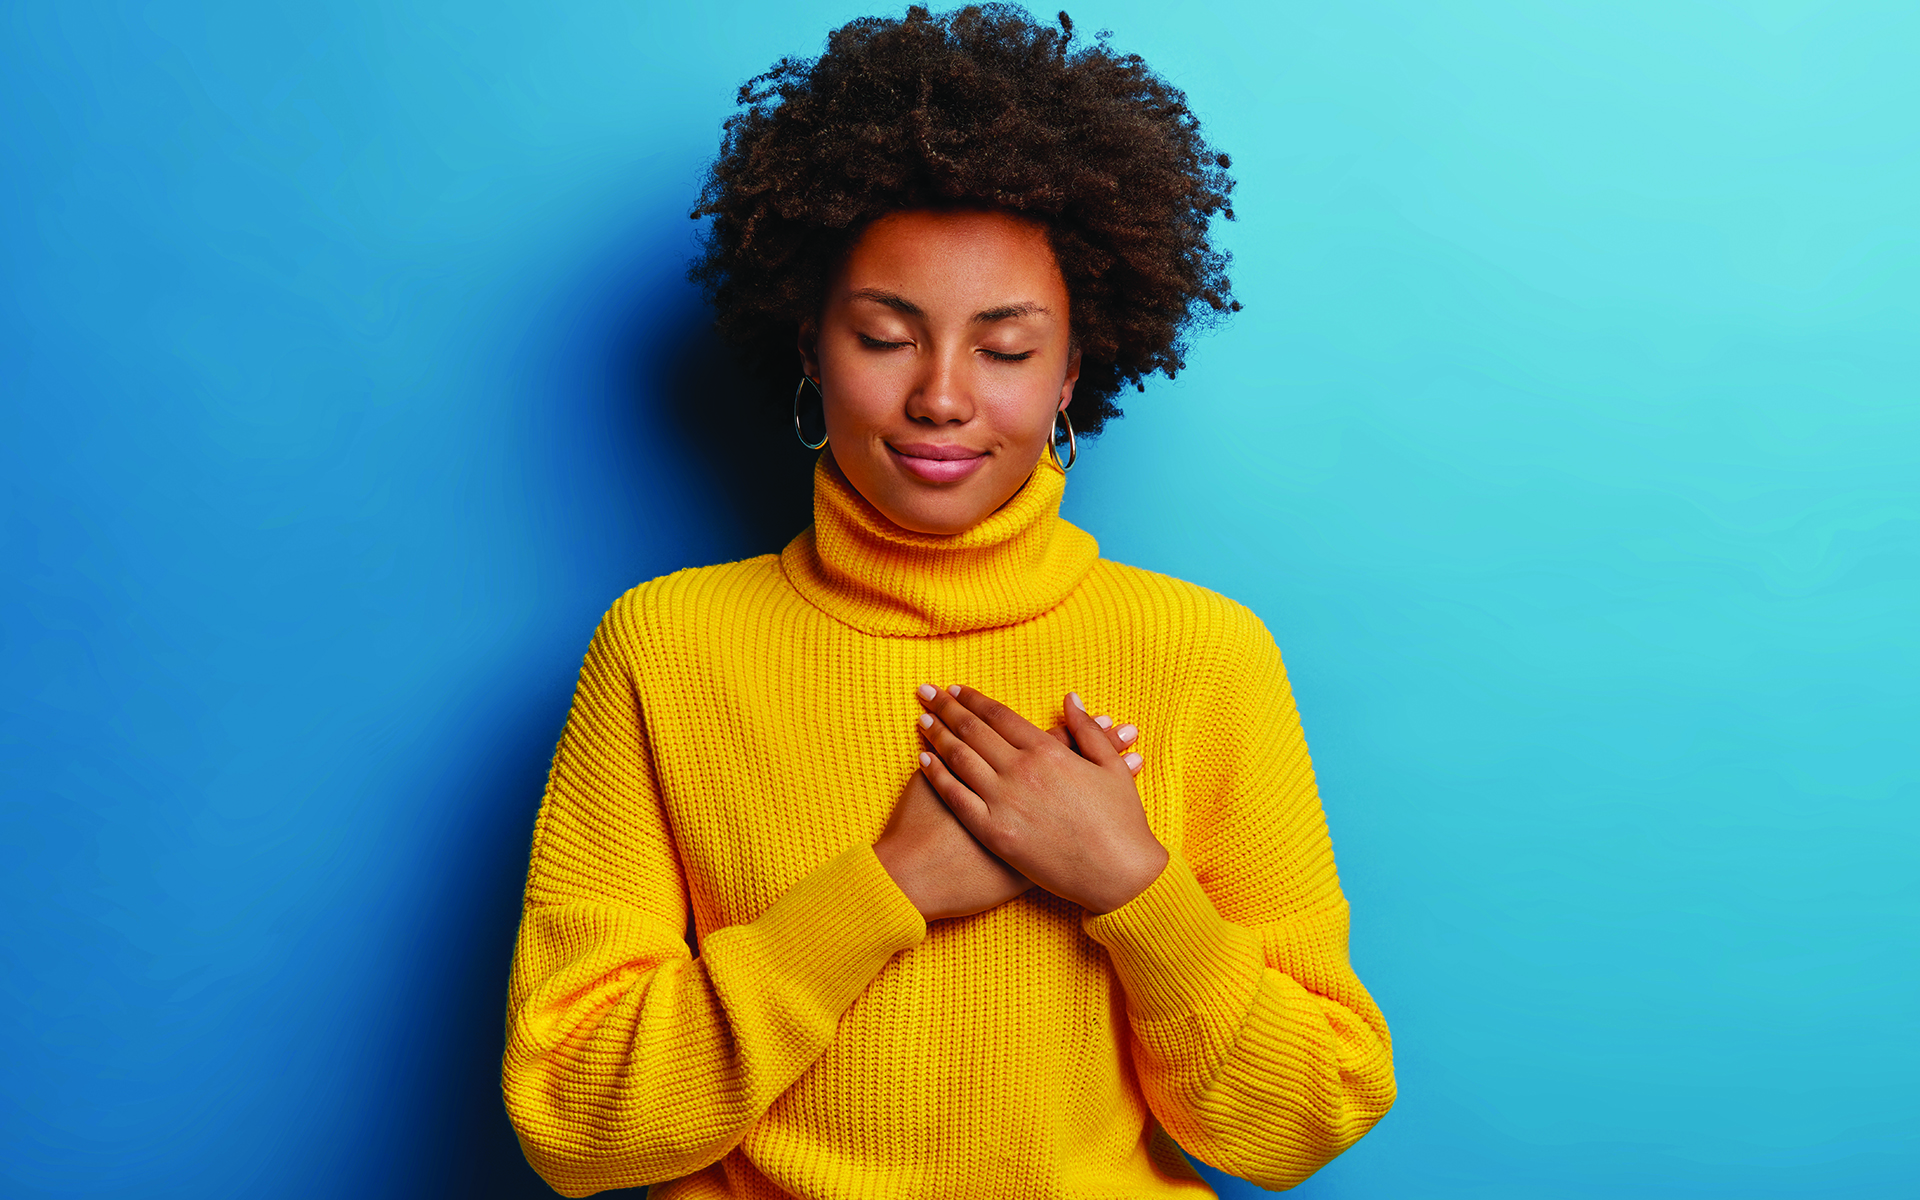 A Simple Meditation to Connect With Loving-Kindness - African American Women holds her hands over her heart